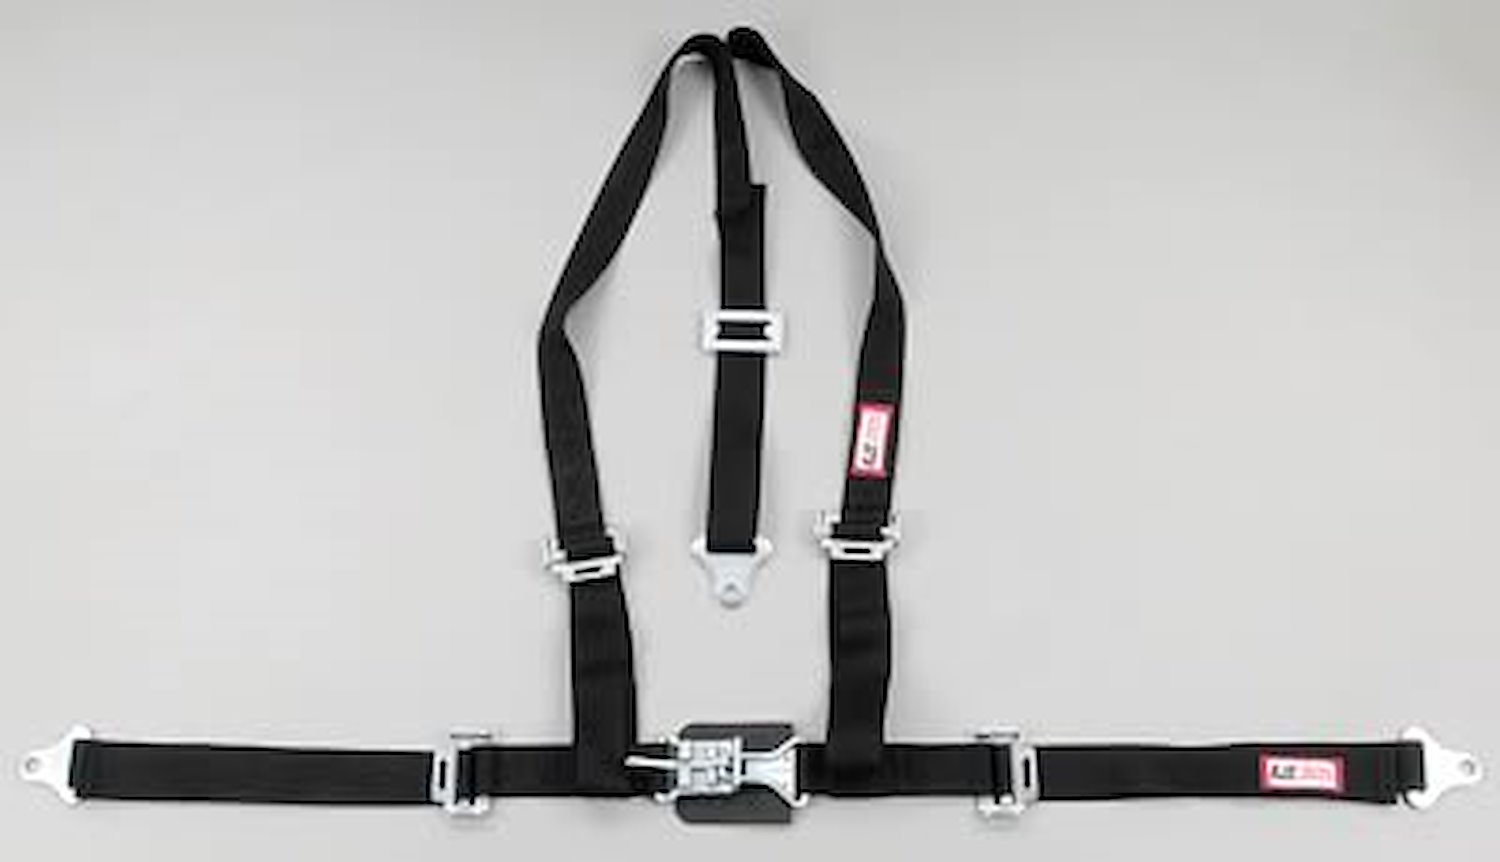 NON-SFI L&L HARNESS 2 PULL UP Lap Belt SEWN IN 2 S.H. V ROLL BAR Mount ALL SNAP ENDS KHAKI